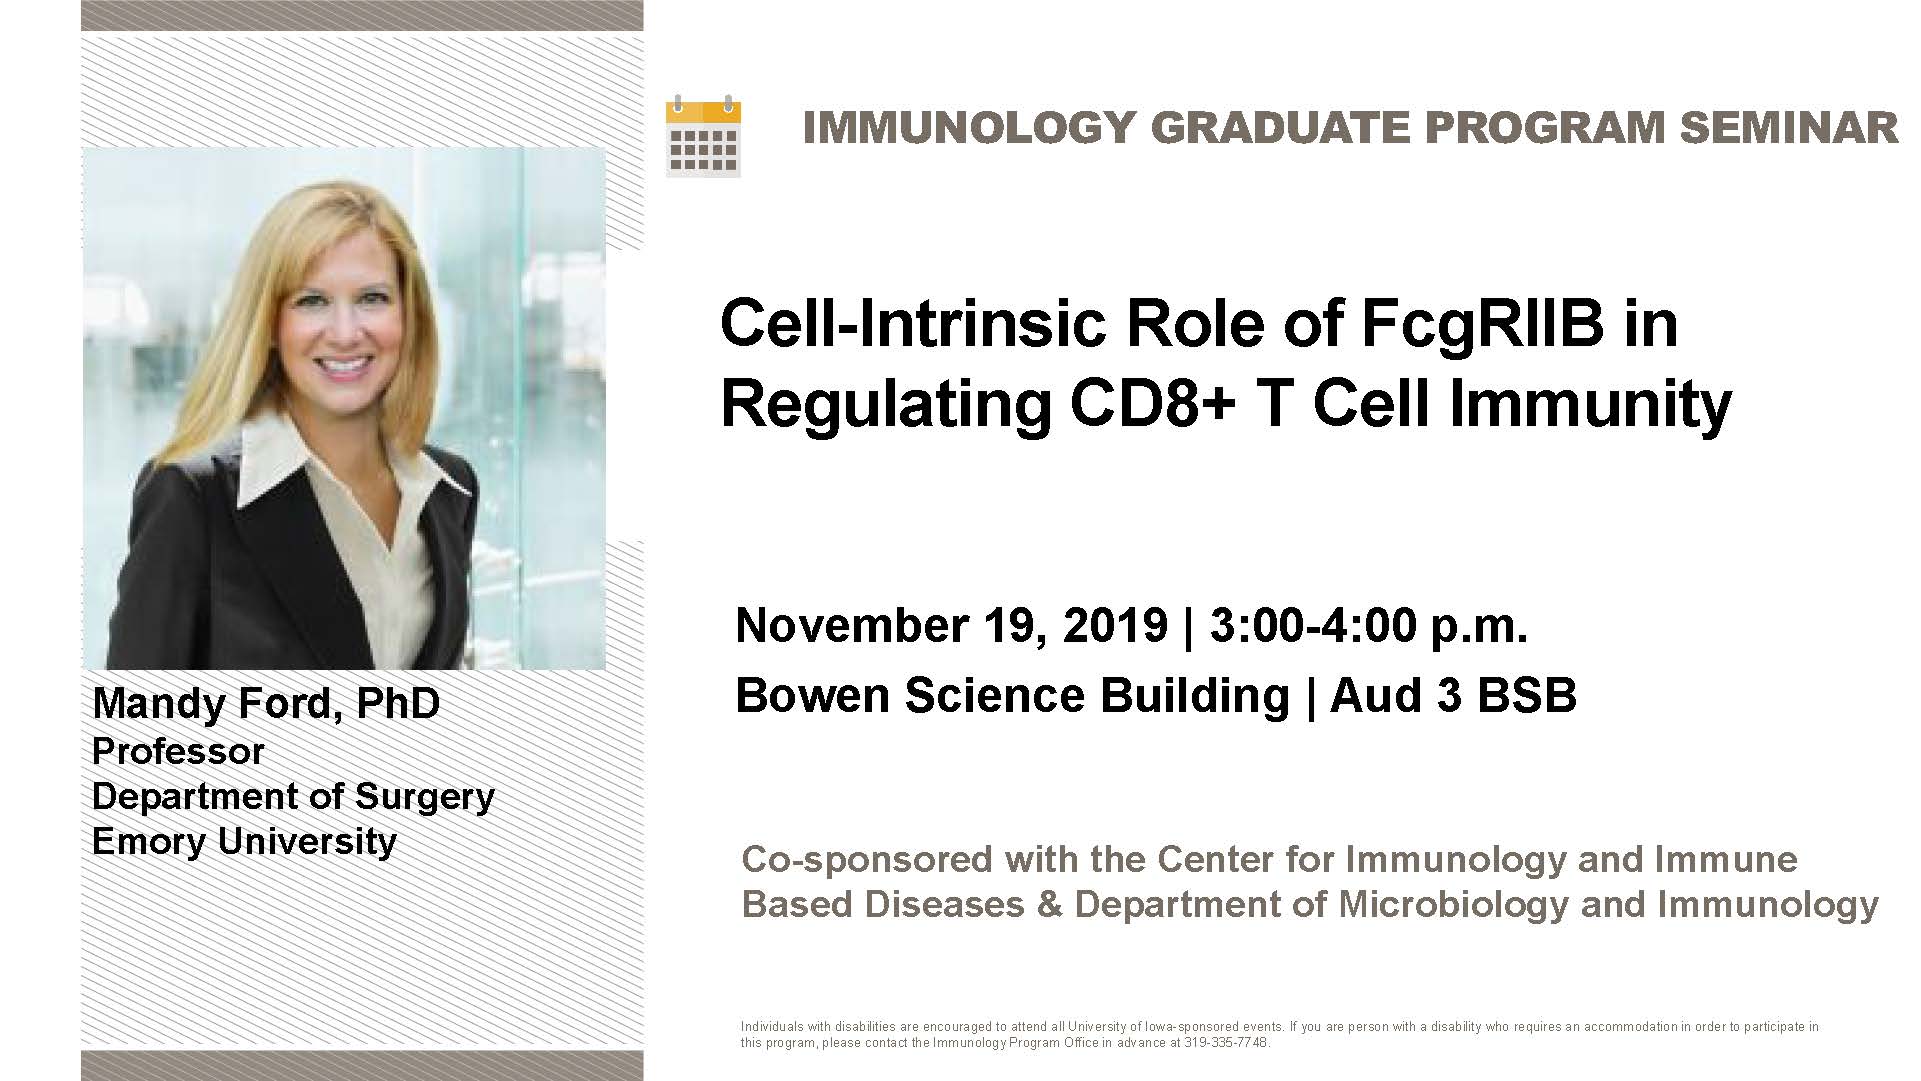 Seminar Speaker: Mandy Ford, PhD: Cell-Intrinsic Role of FcgRIIBin Regulating CD8+ T Cell Immunity promotional image